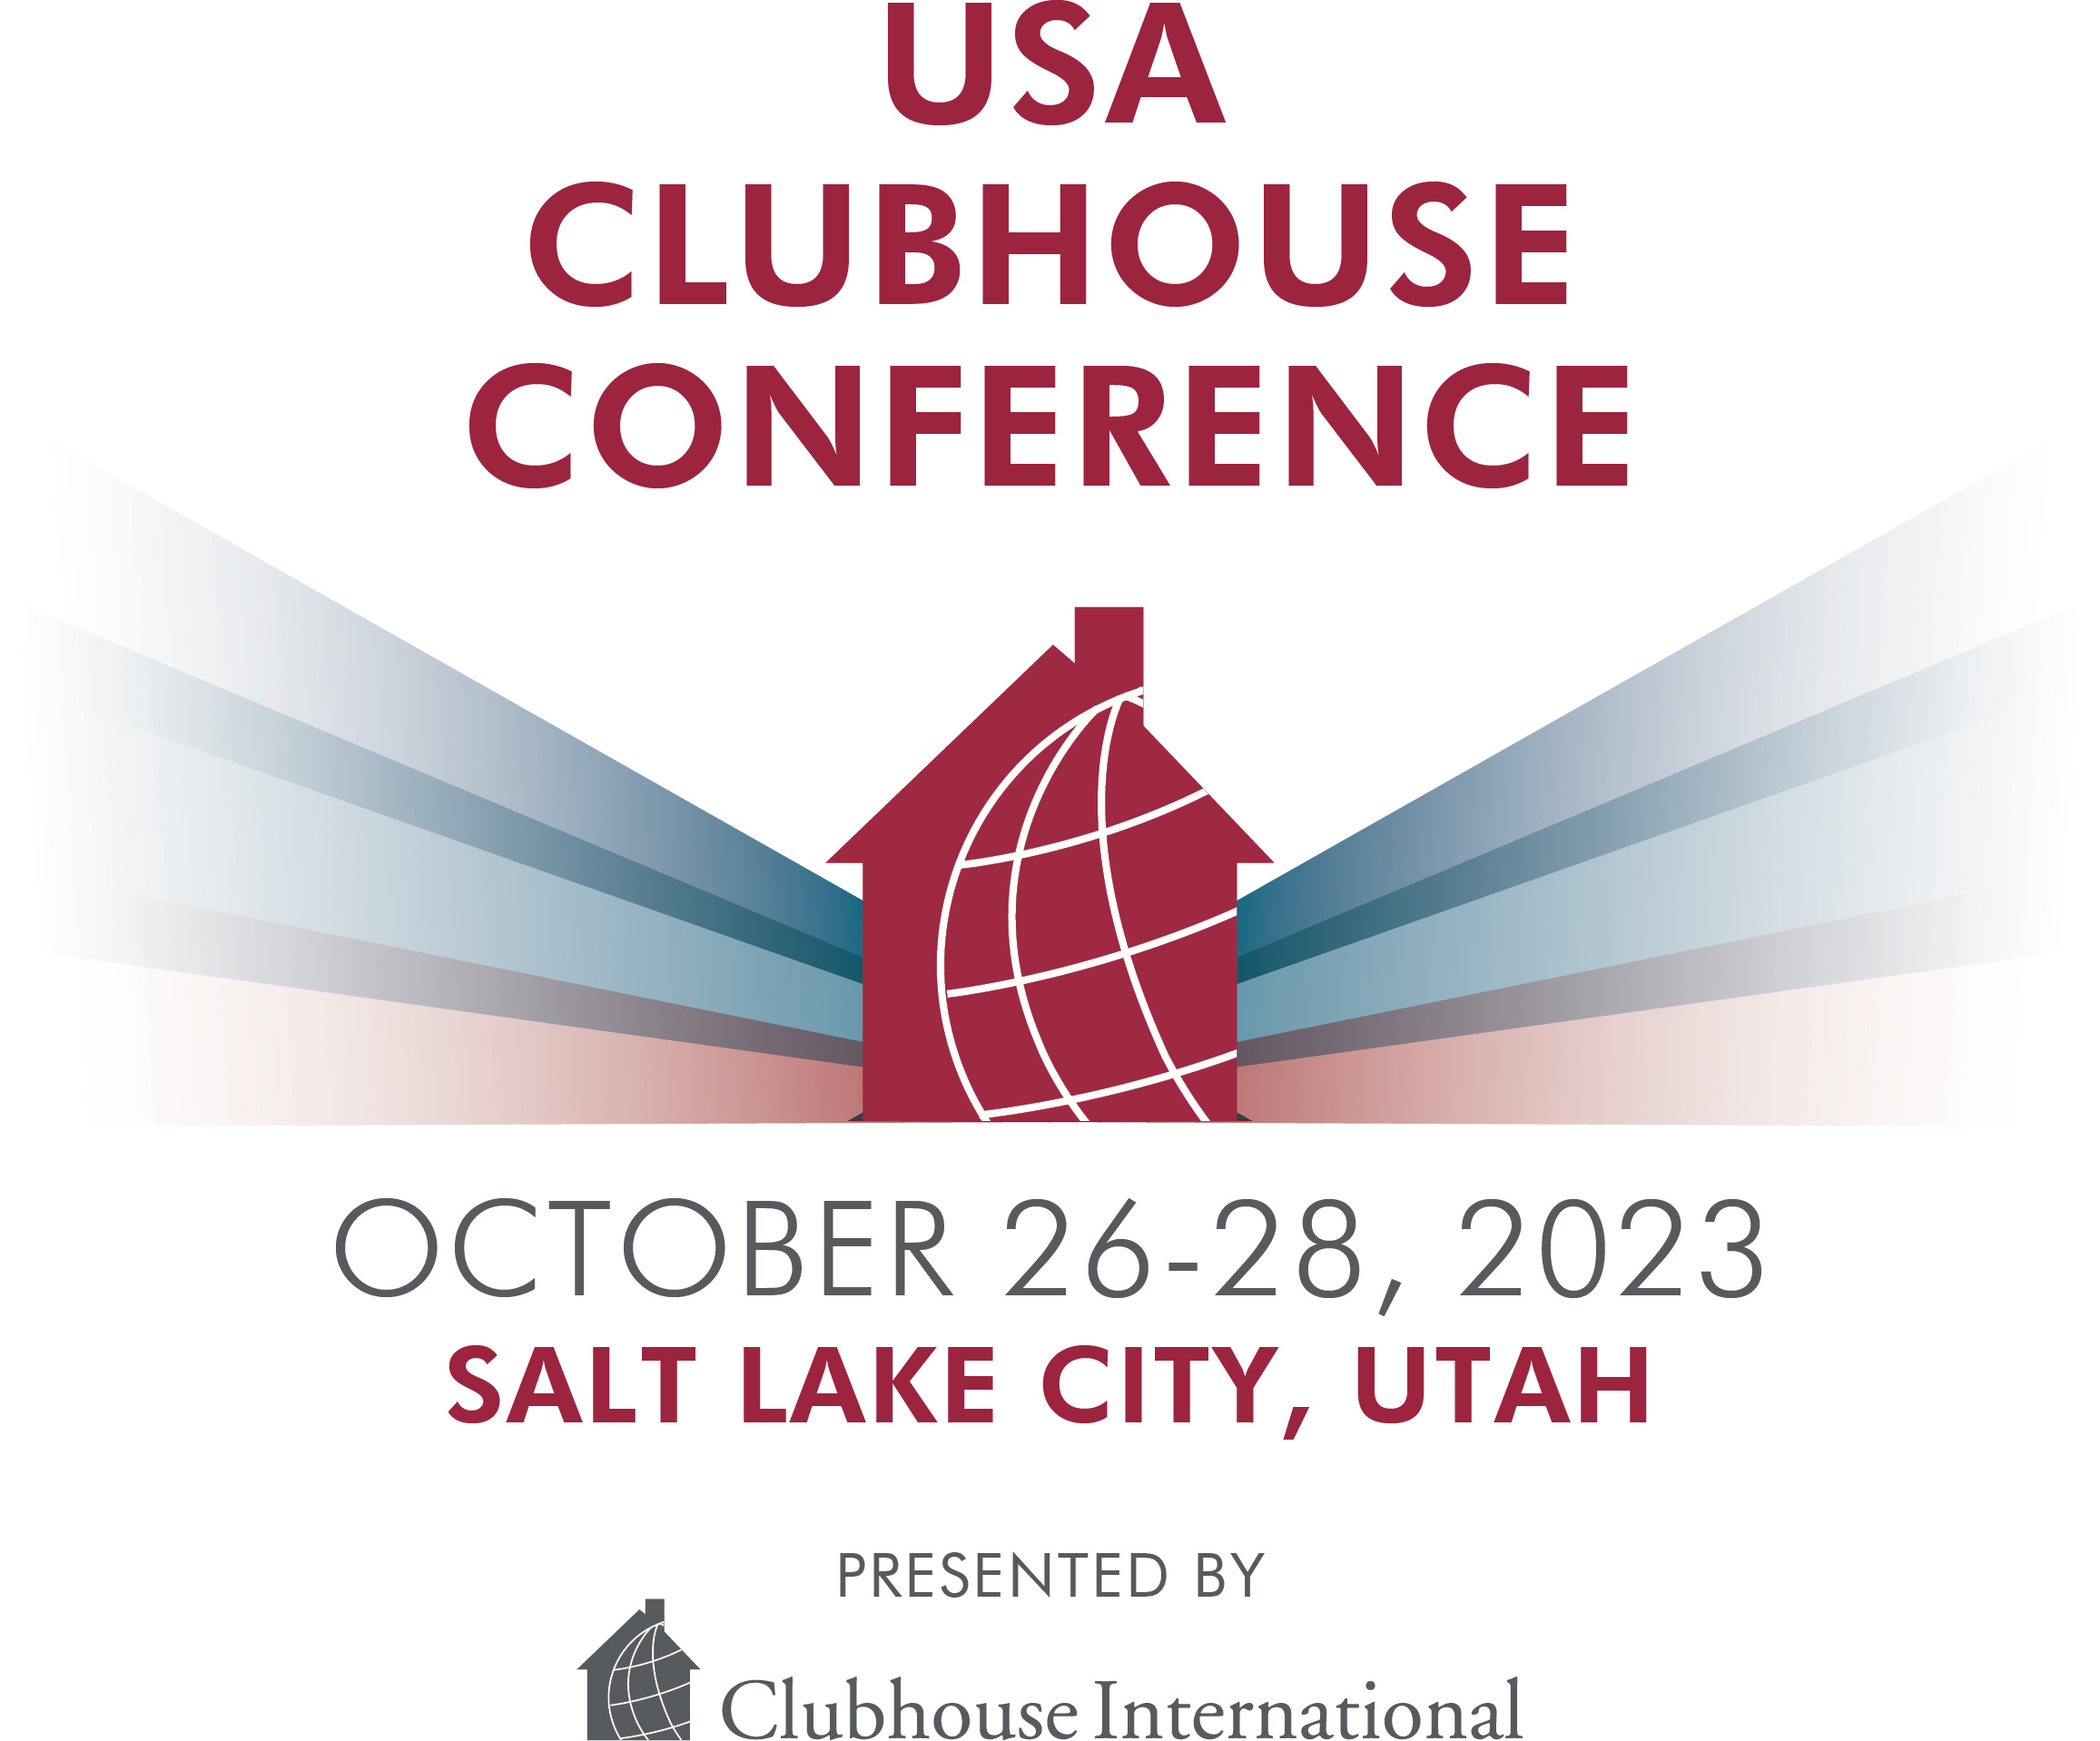 Thank you for Coming to Our 2023 USA Clubhouse Conference in Salt Lake